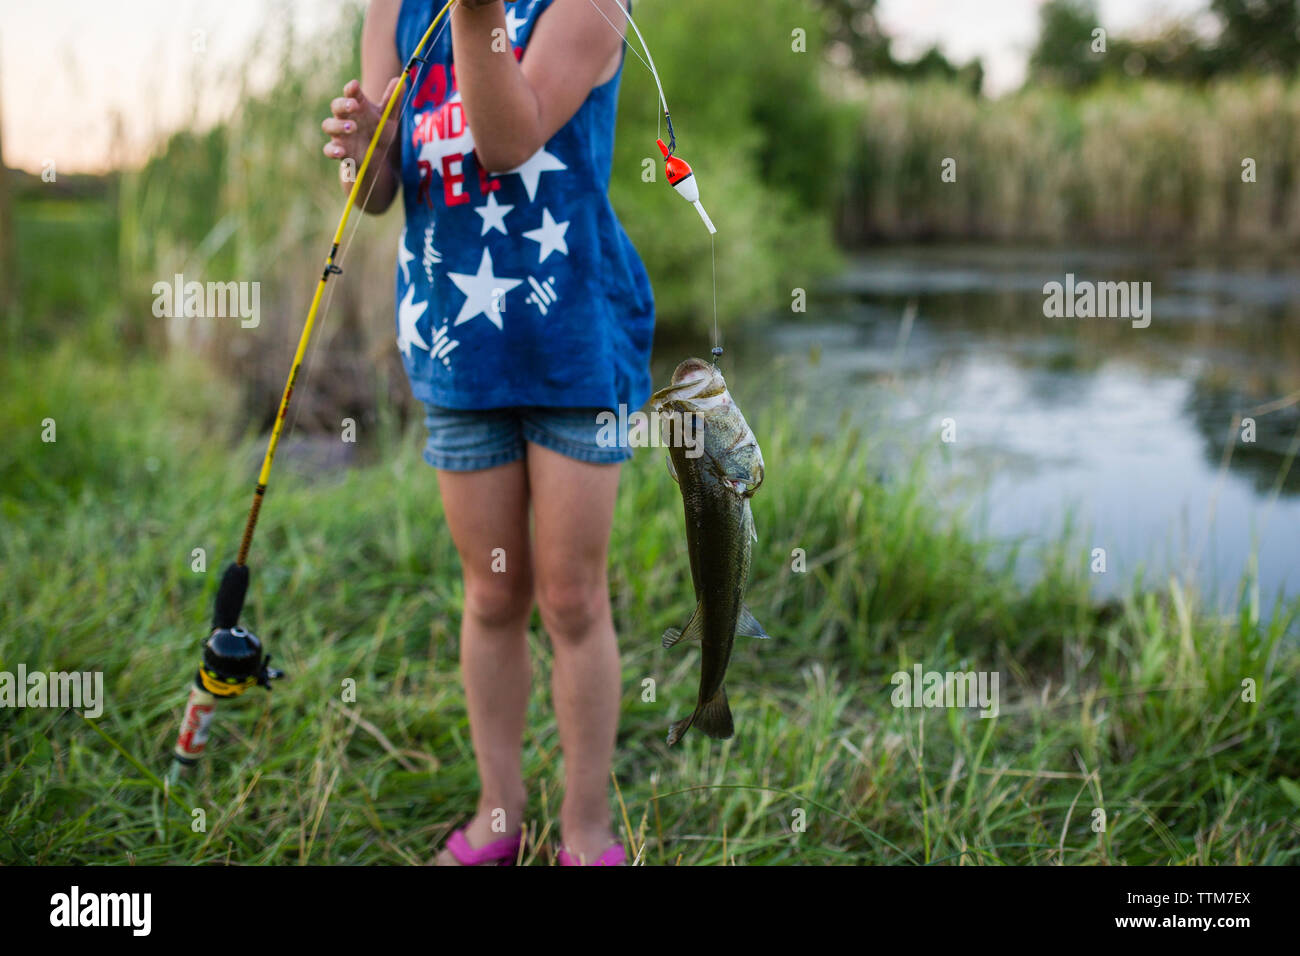 Girl holding fish fishing rod hi-res stock photography and images - Alamy